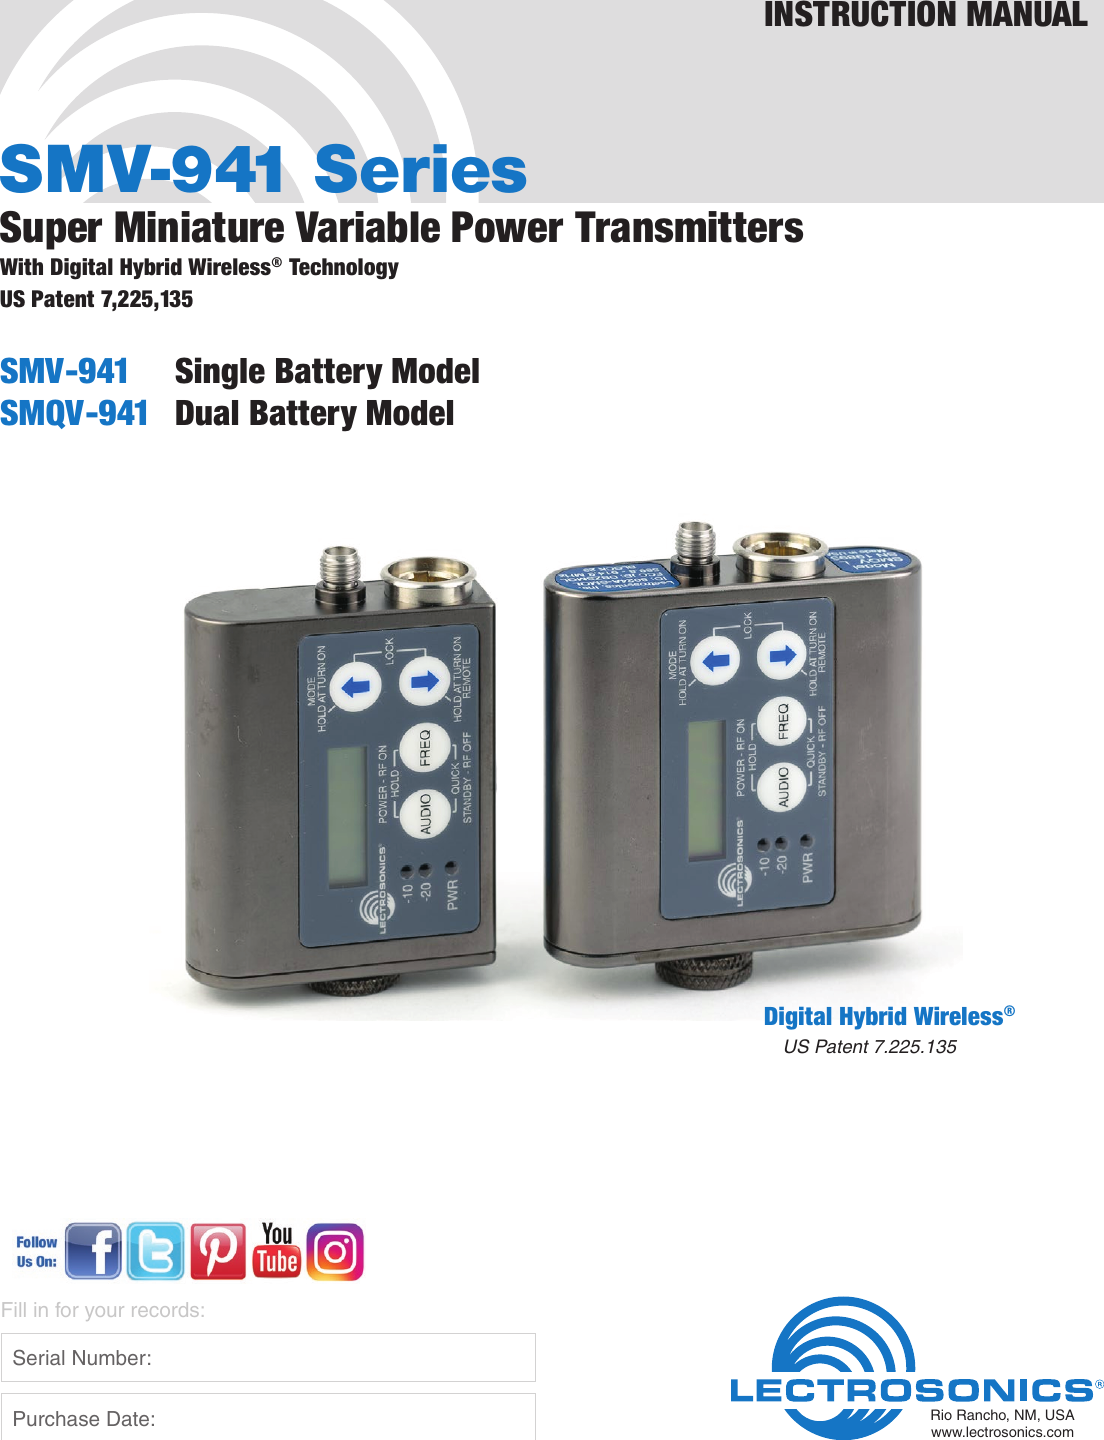 SMV-941 SeriesSuper Miniature Variable Power TransmittersWith Digital Hybrid Wireless® TechnologySMV-941  Single Battery ModelSMQV-941  Dual Battery ModelINSTRUCTION MANUALRio Rancho, NM, USAwww.lectrosonics.comFill in for your records:  Serial Number:  Purchase Date:US Patent 7,225,135Digital Hybrid Wireless®US Patent 7.225.135